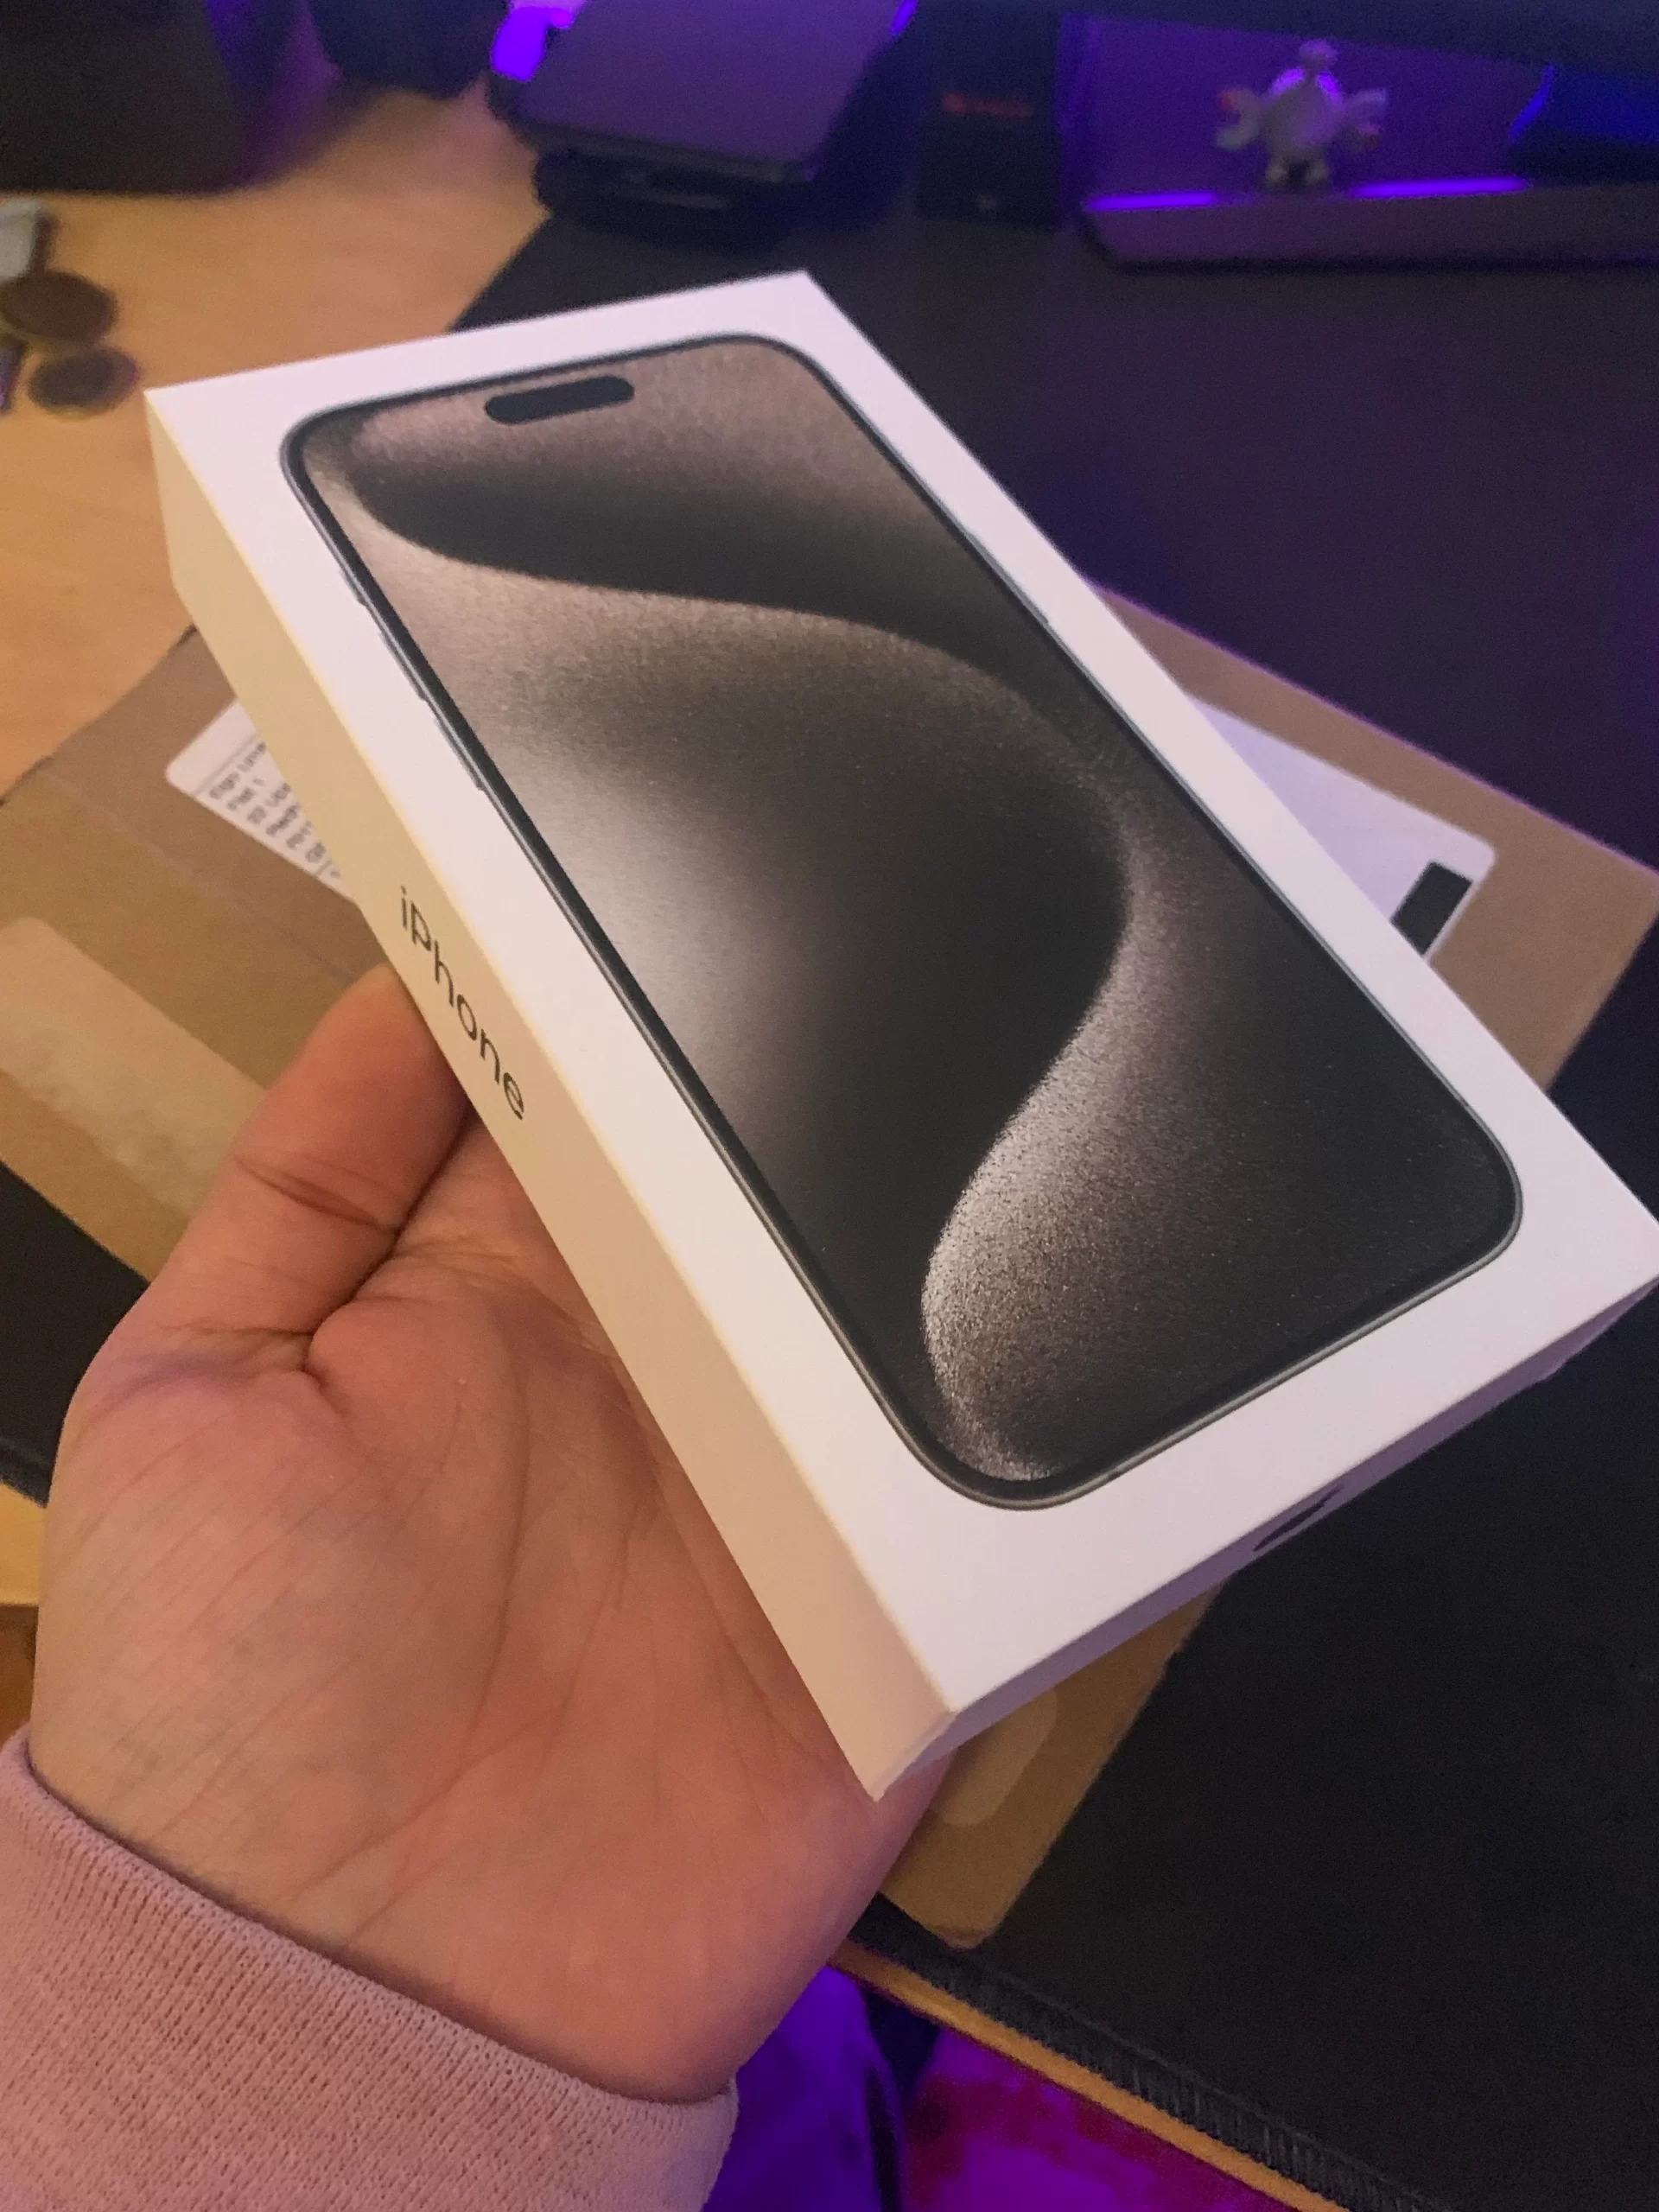 UK Customer Receives Android Impersonating iPhone 15 Pro Max in Online Order